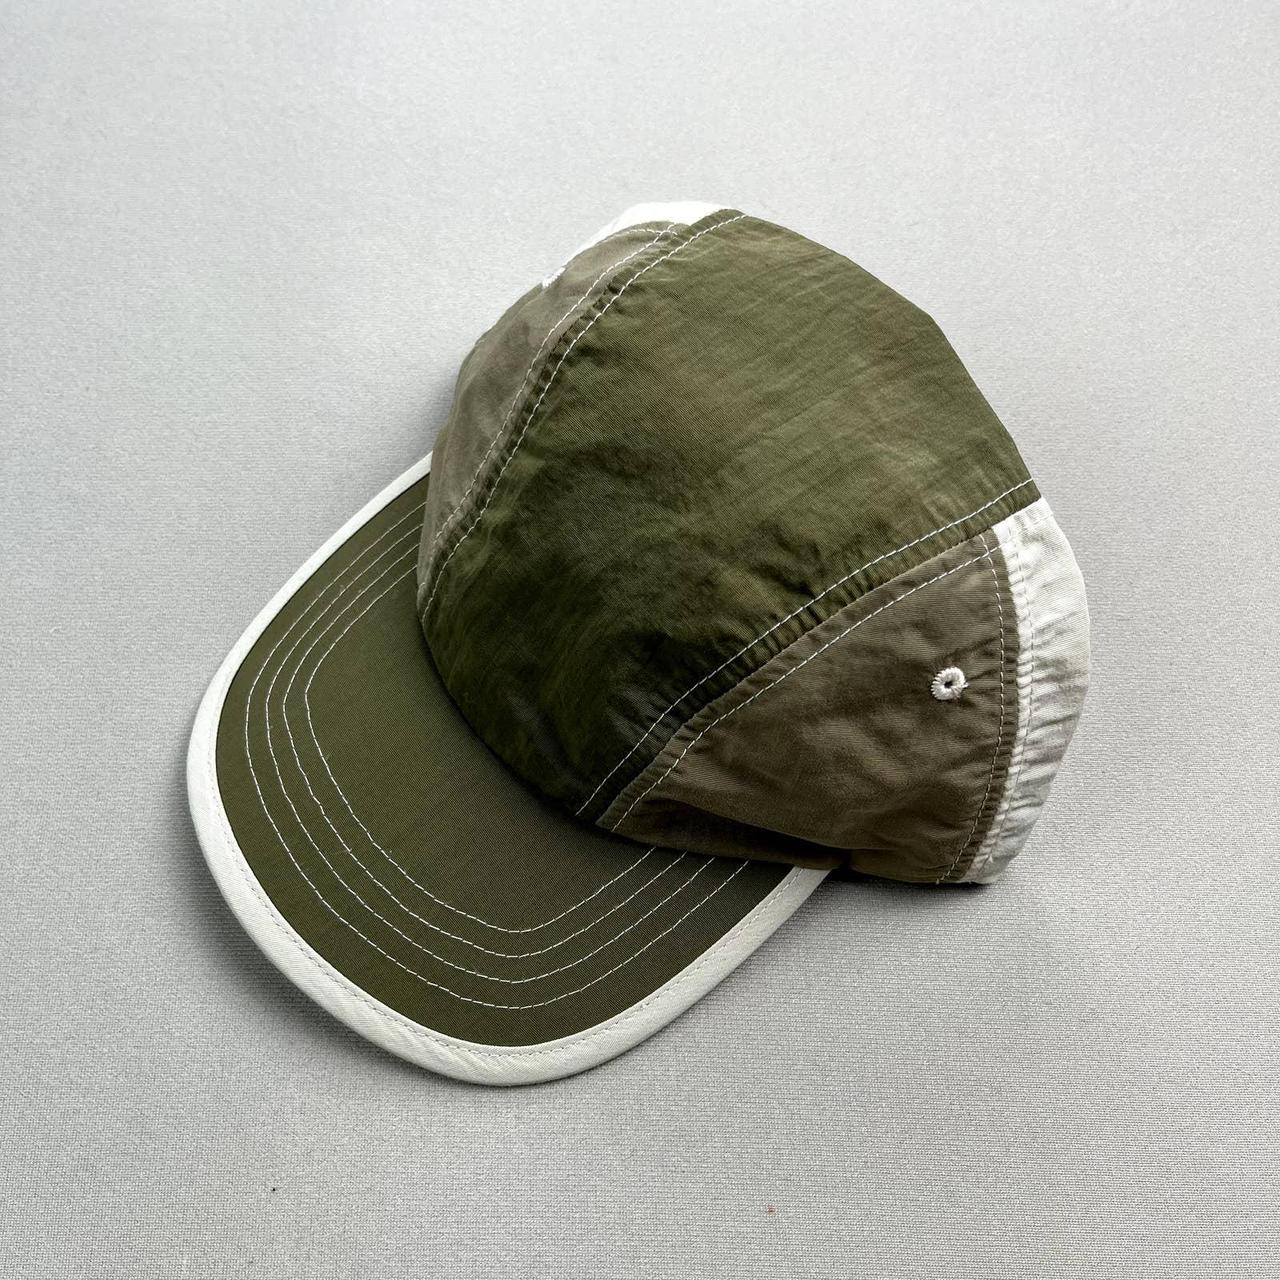 REI Hat Cap 5 Panel Fitted 7-3/8 Olive Green Tan... - Depop